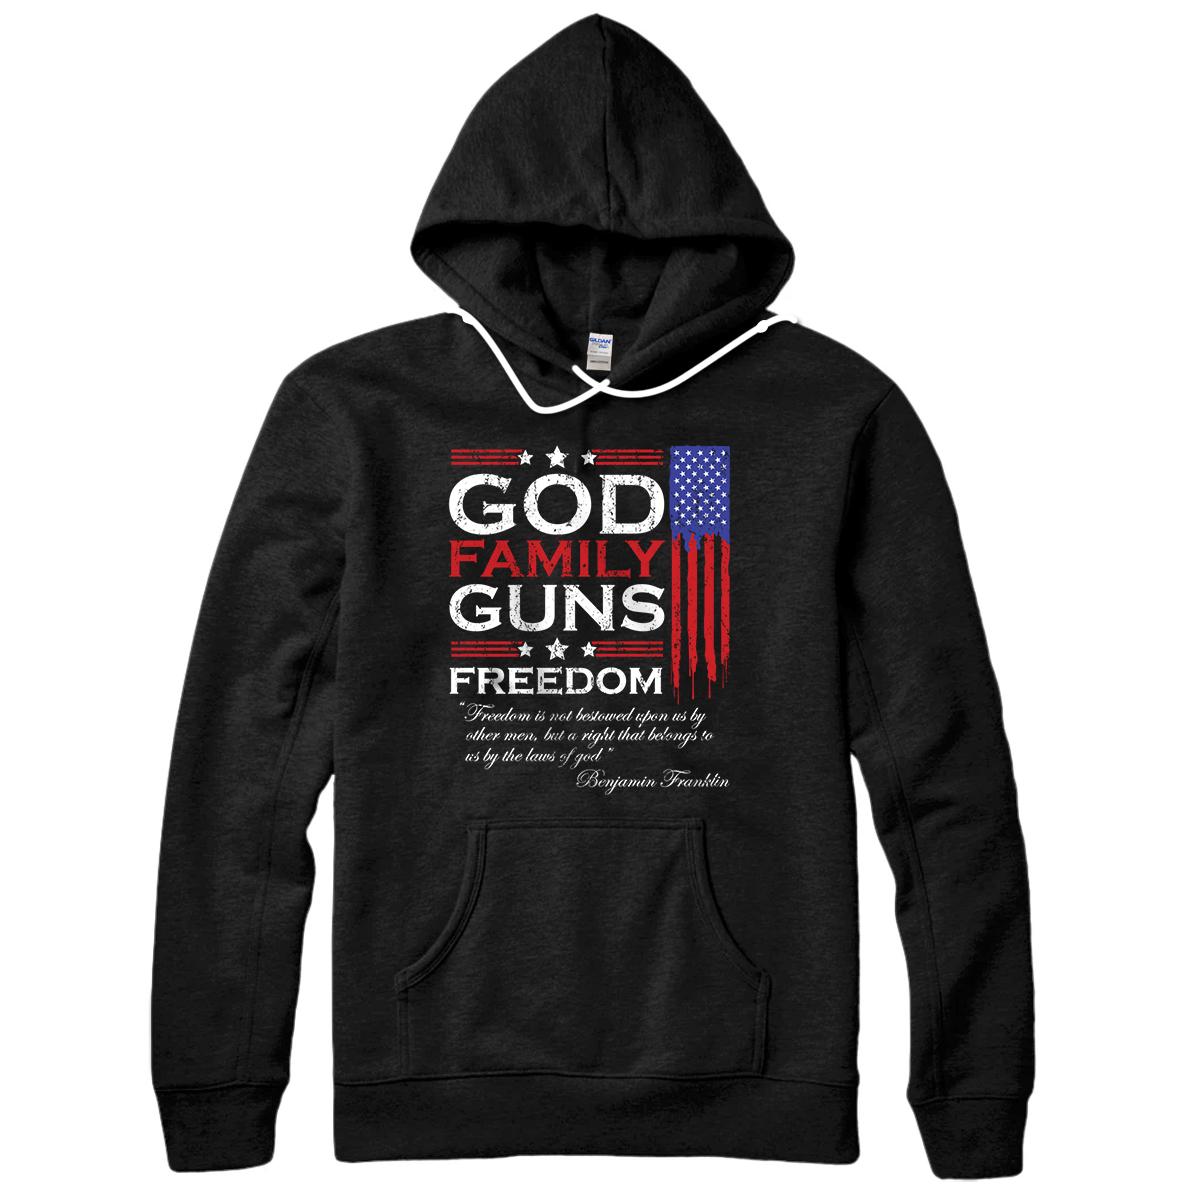 Personalized FAMILY GOD GUNS AND FREEDOM CHRISTIAN MAGA 2020 TRUMP Pullover Hoodie